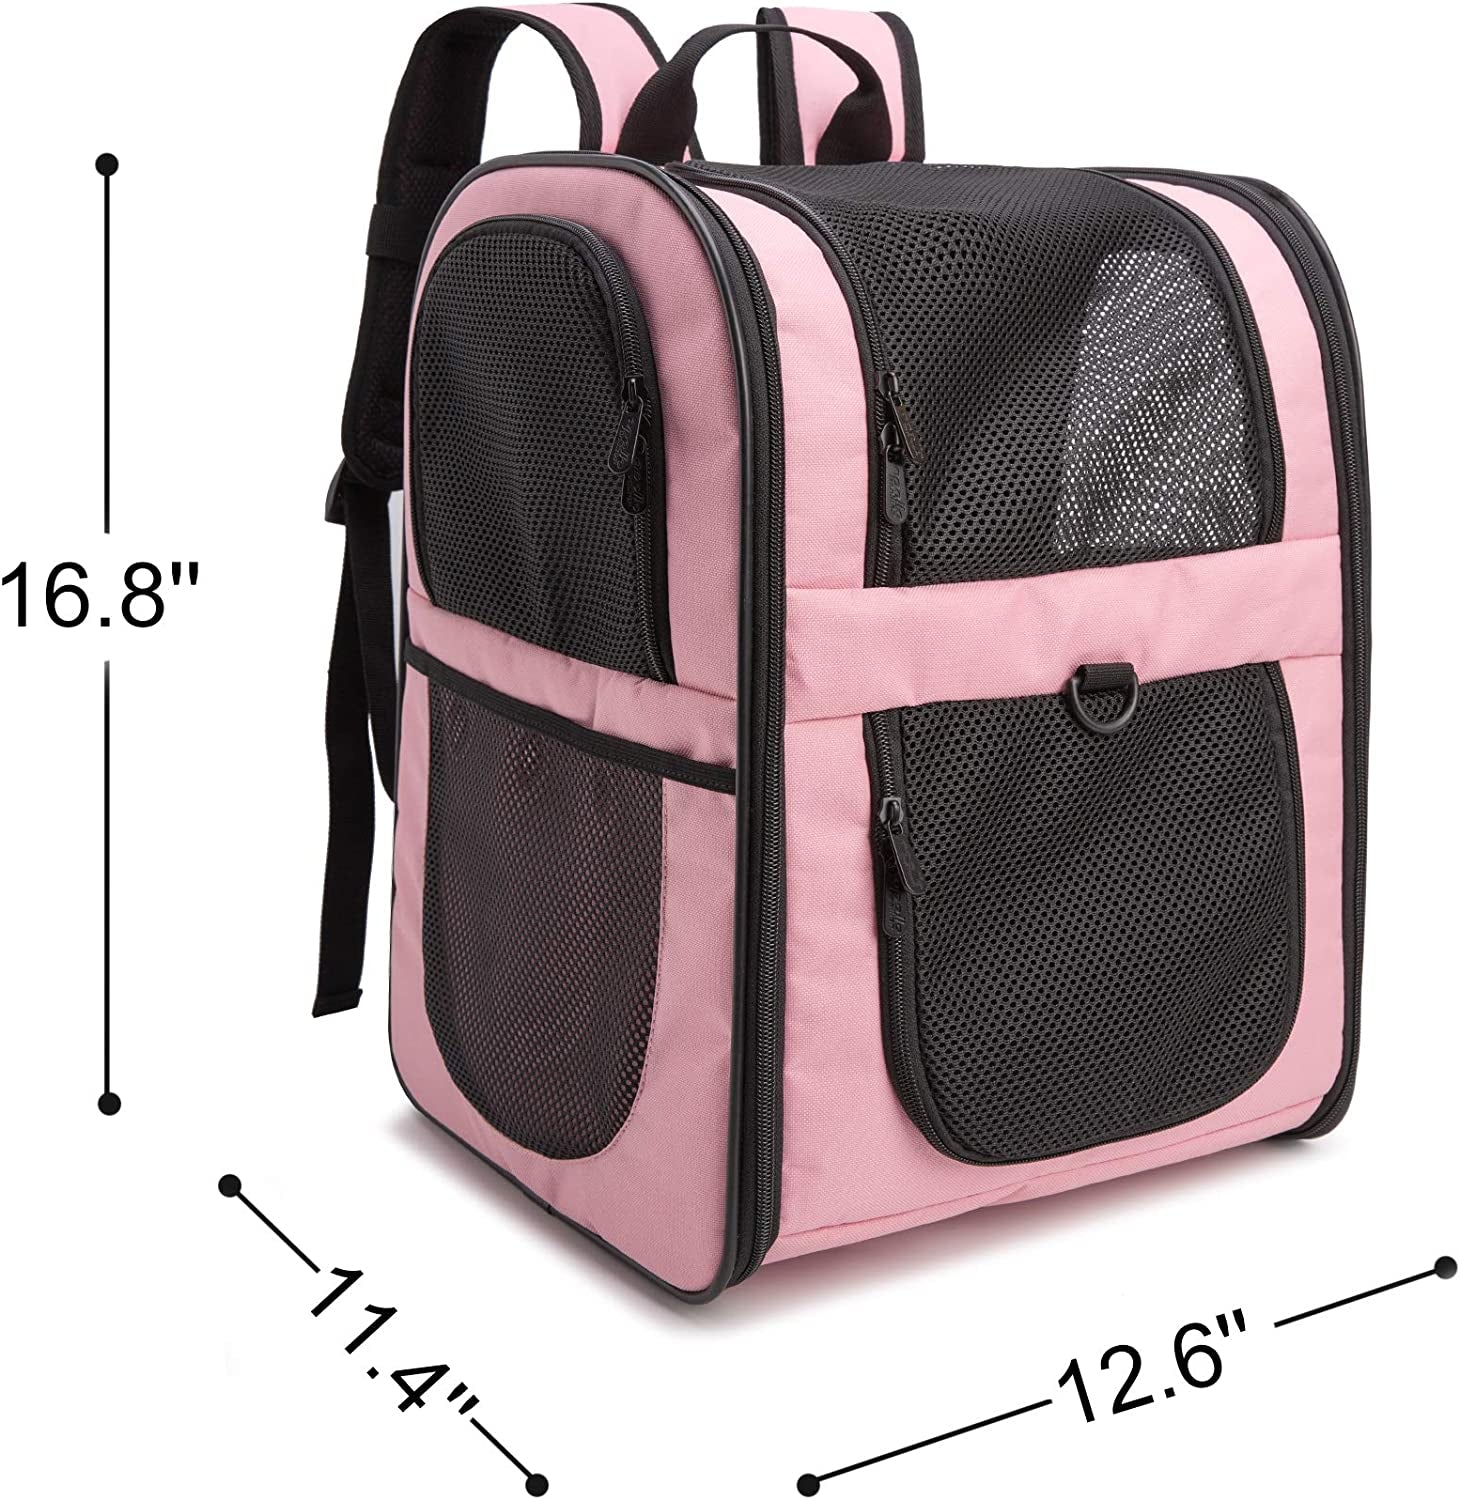 Pet Carrier Backpack for Large/Small Cats and Dogs, Puppies, Safety Features and Cushion Back Support for Travel, Hiking, Outdoor Use (Pink)